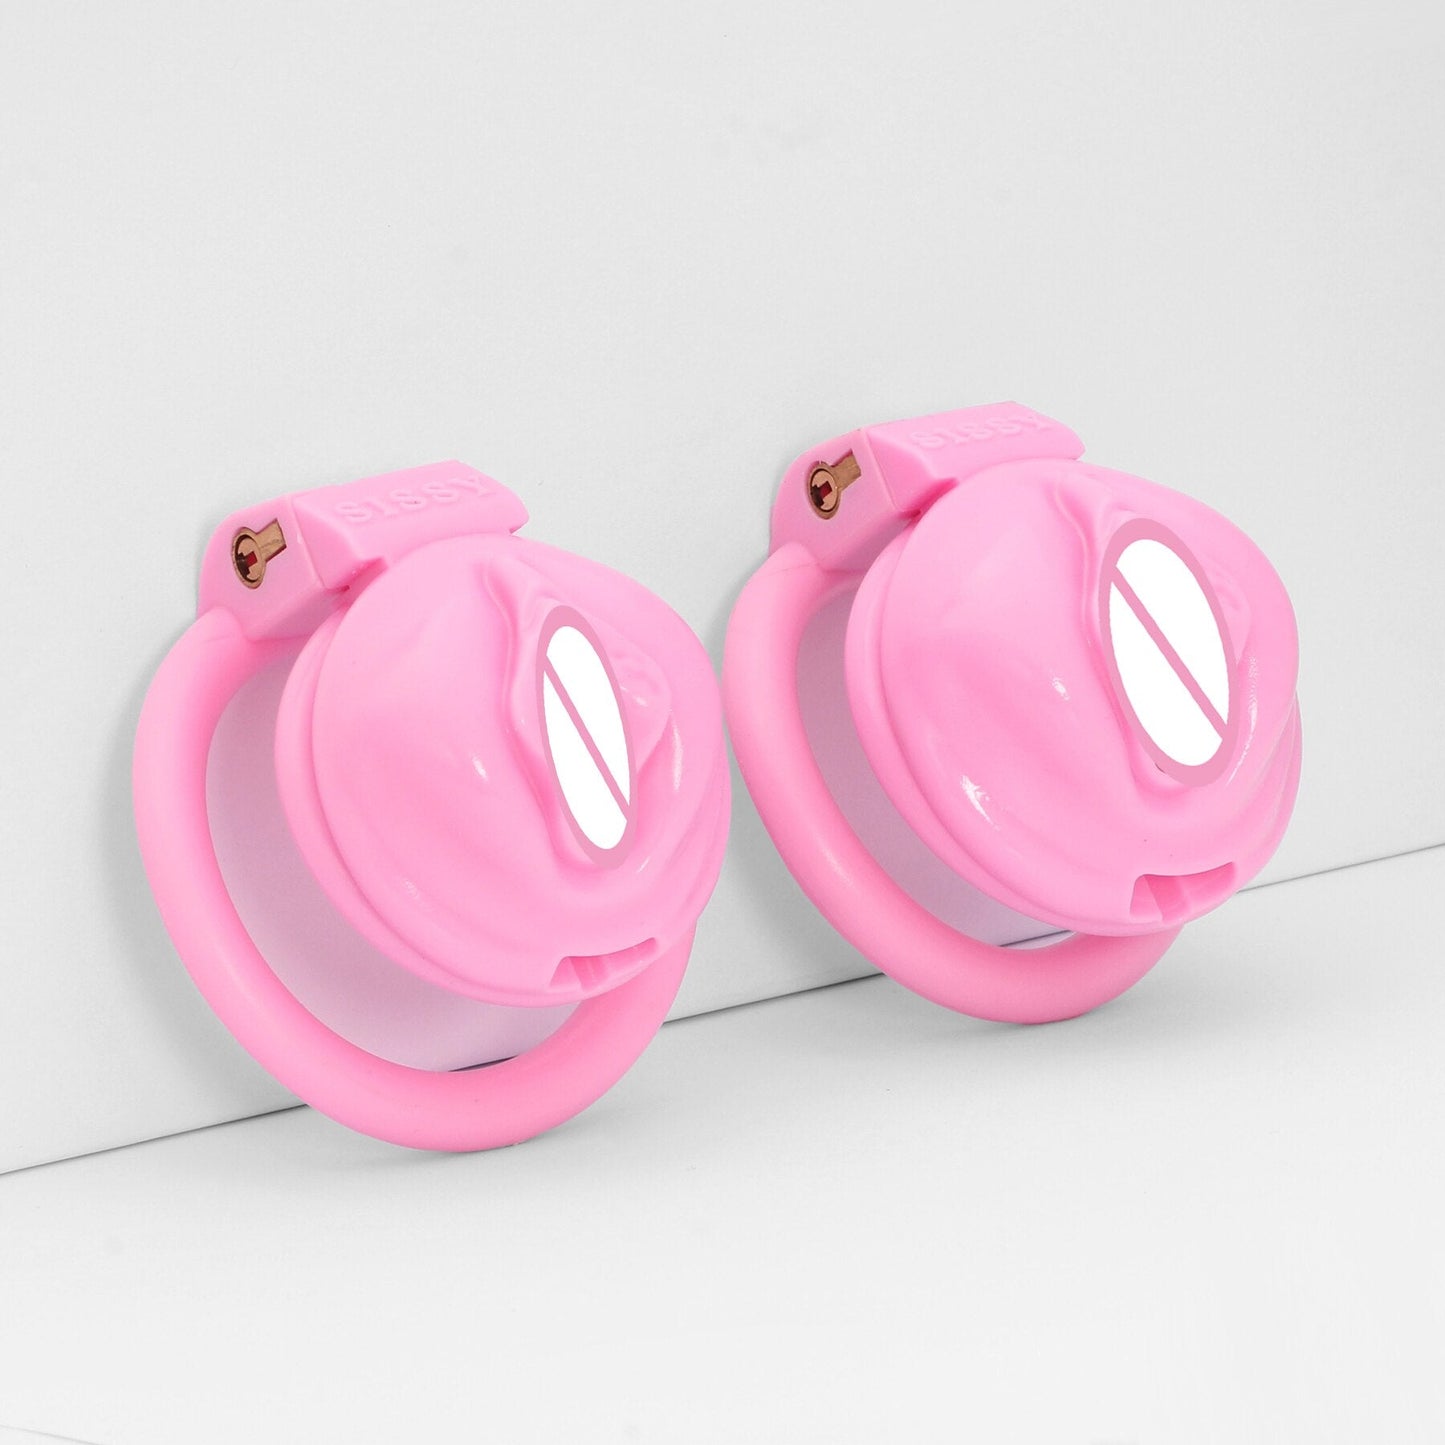 Pink Sissy Chastity Cage: Small Male Chastity Device for BDSM Bondage, Lockable Slave Penis Ring - KeepMeLocked